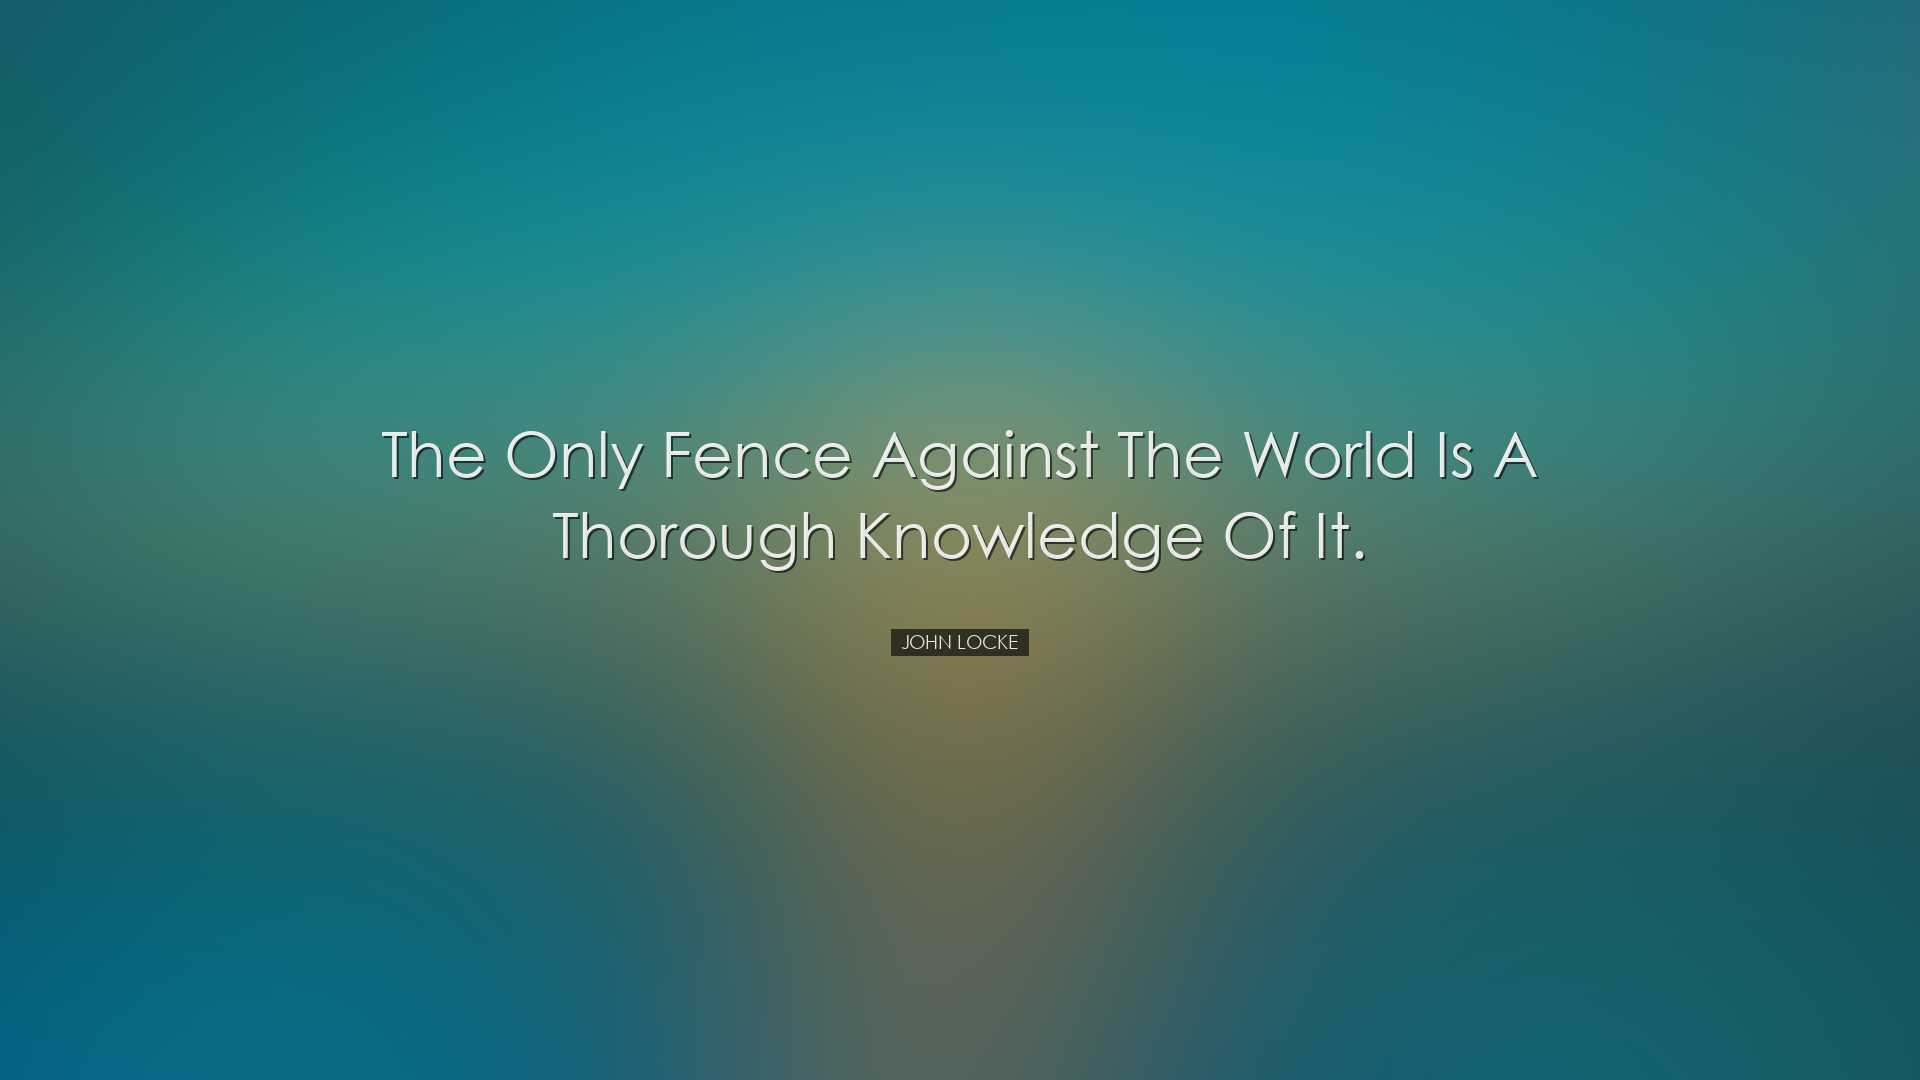 The only fence against the world is a thorough knowledge of it. -